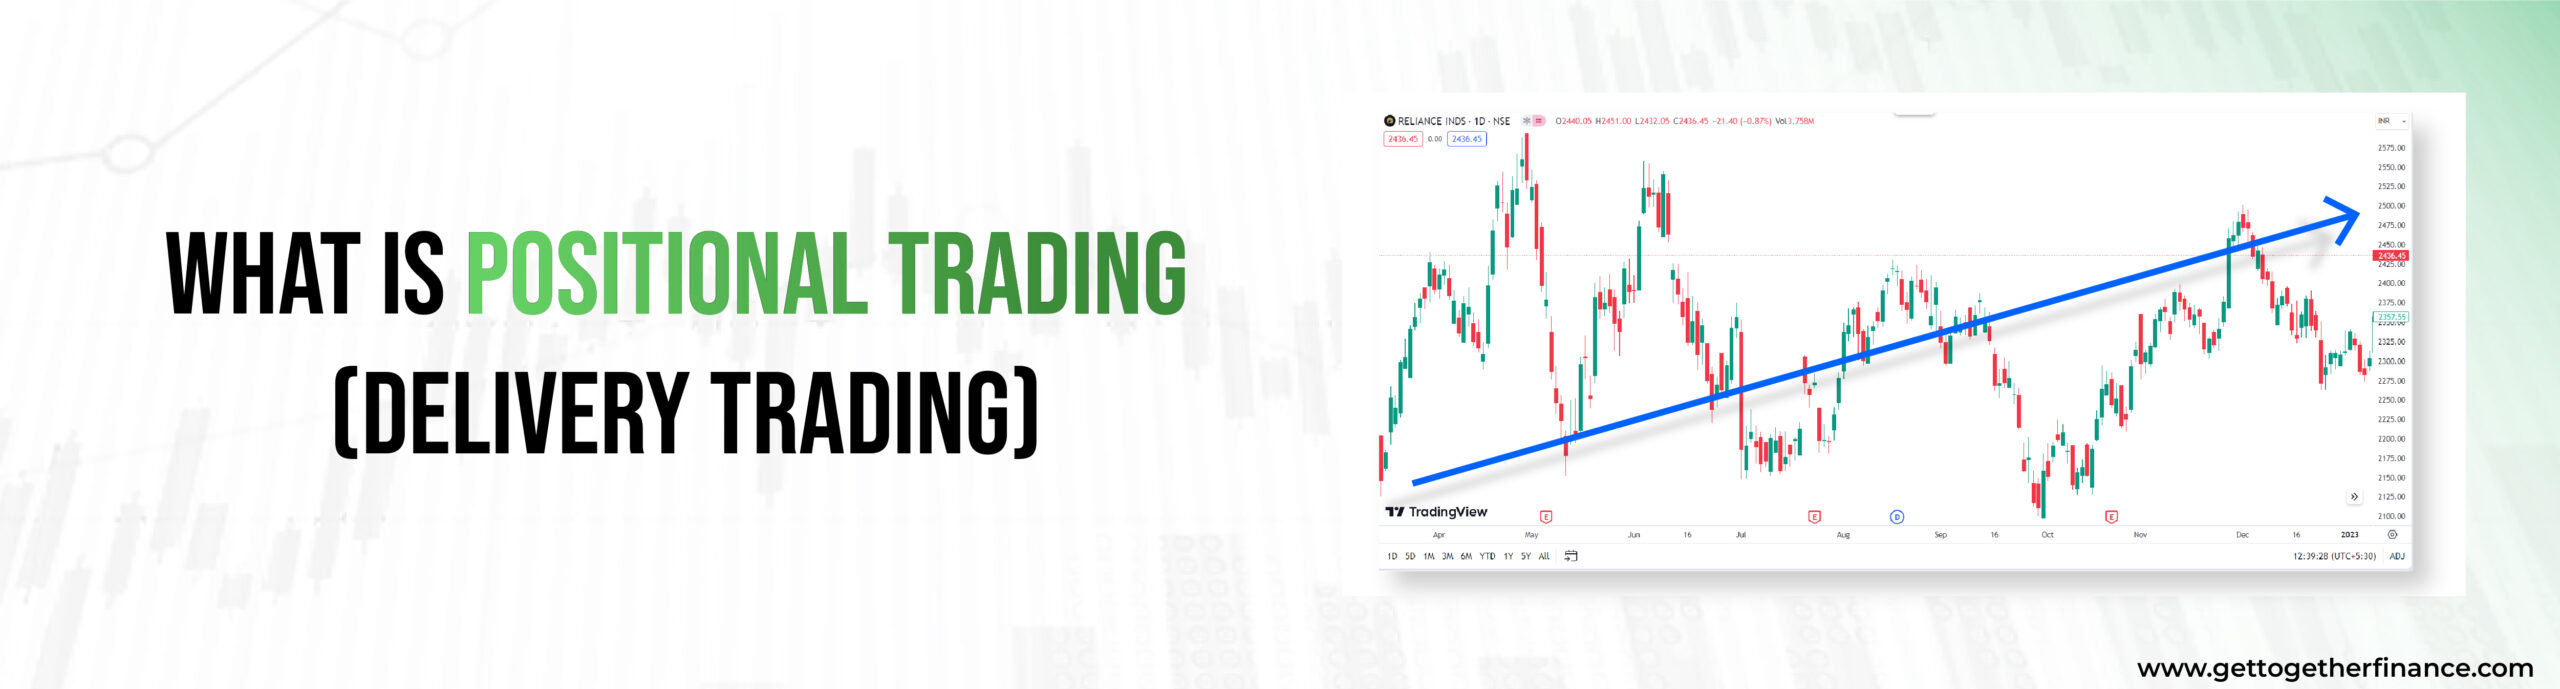 what is positional trading